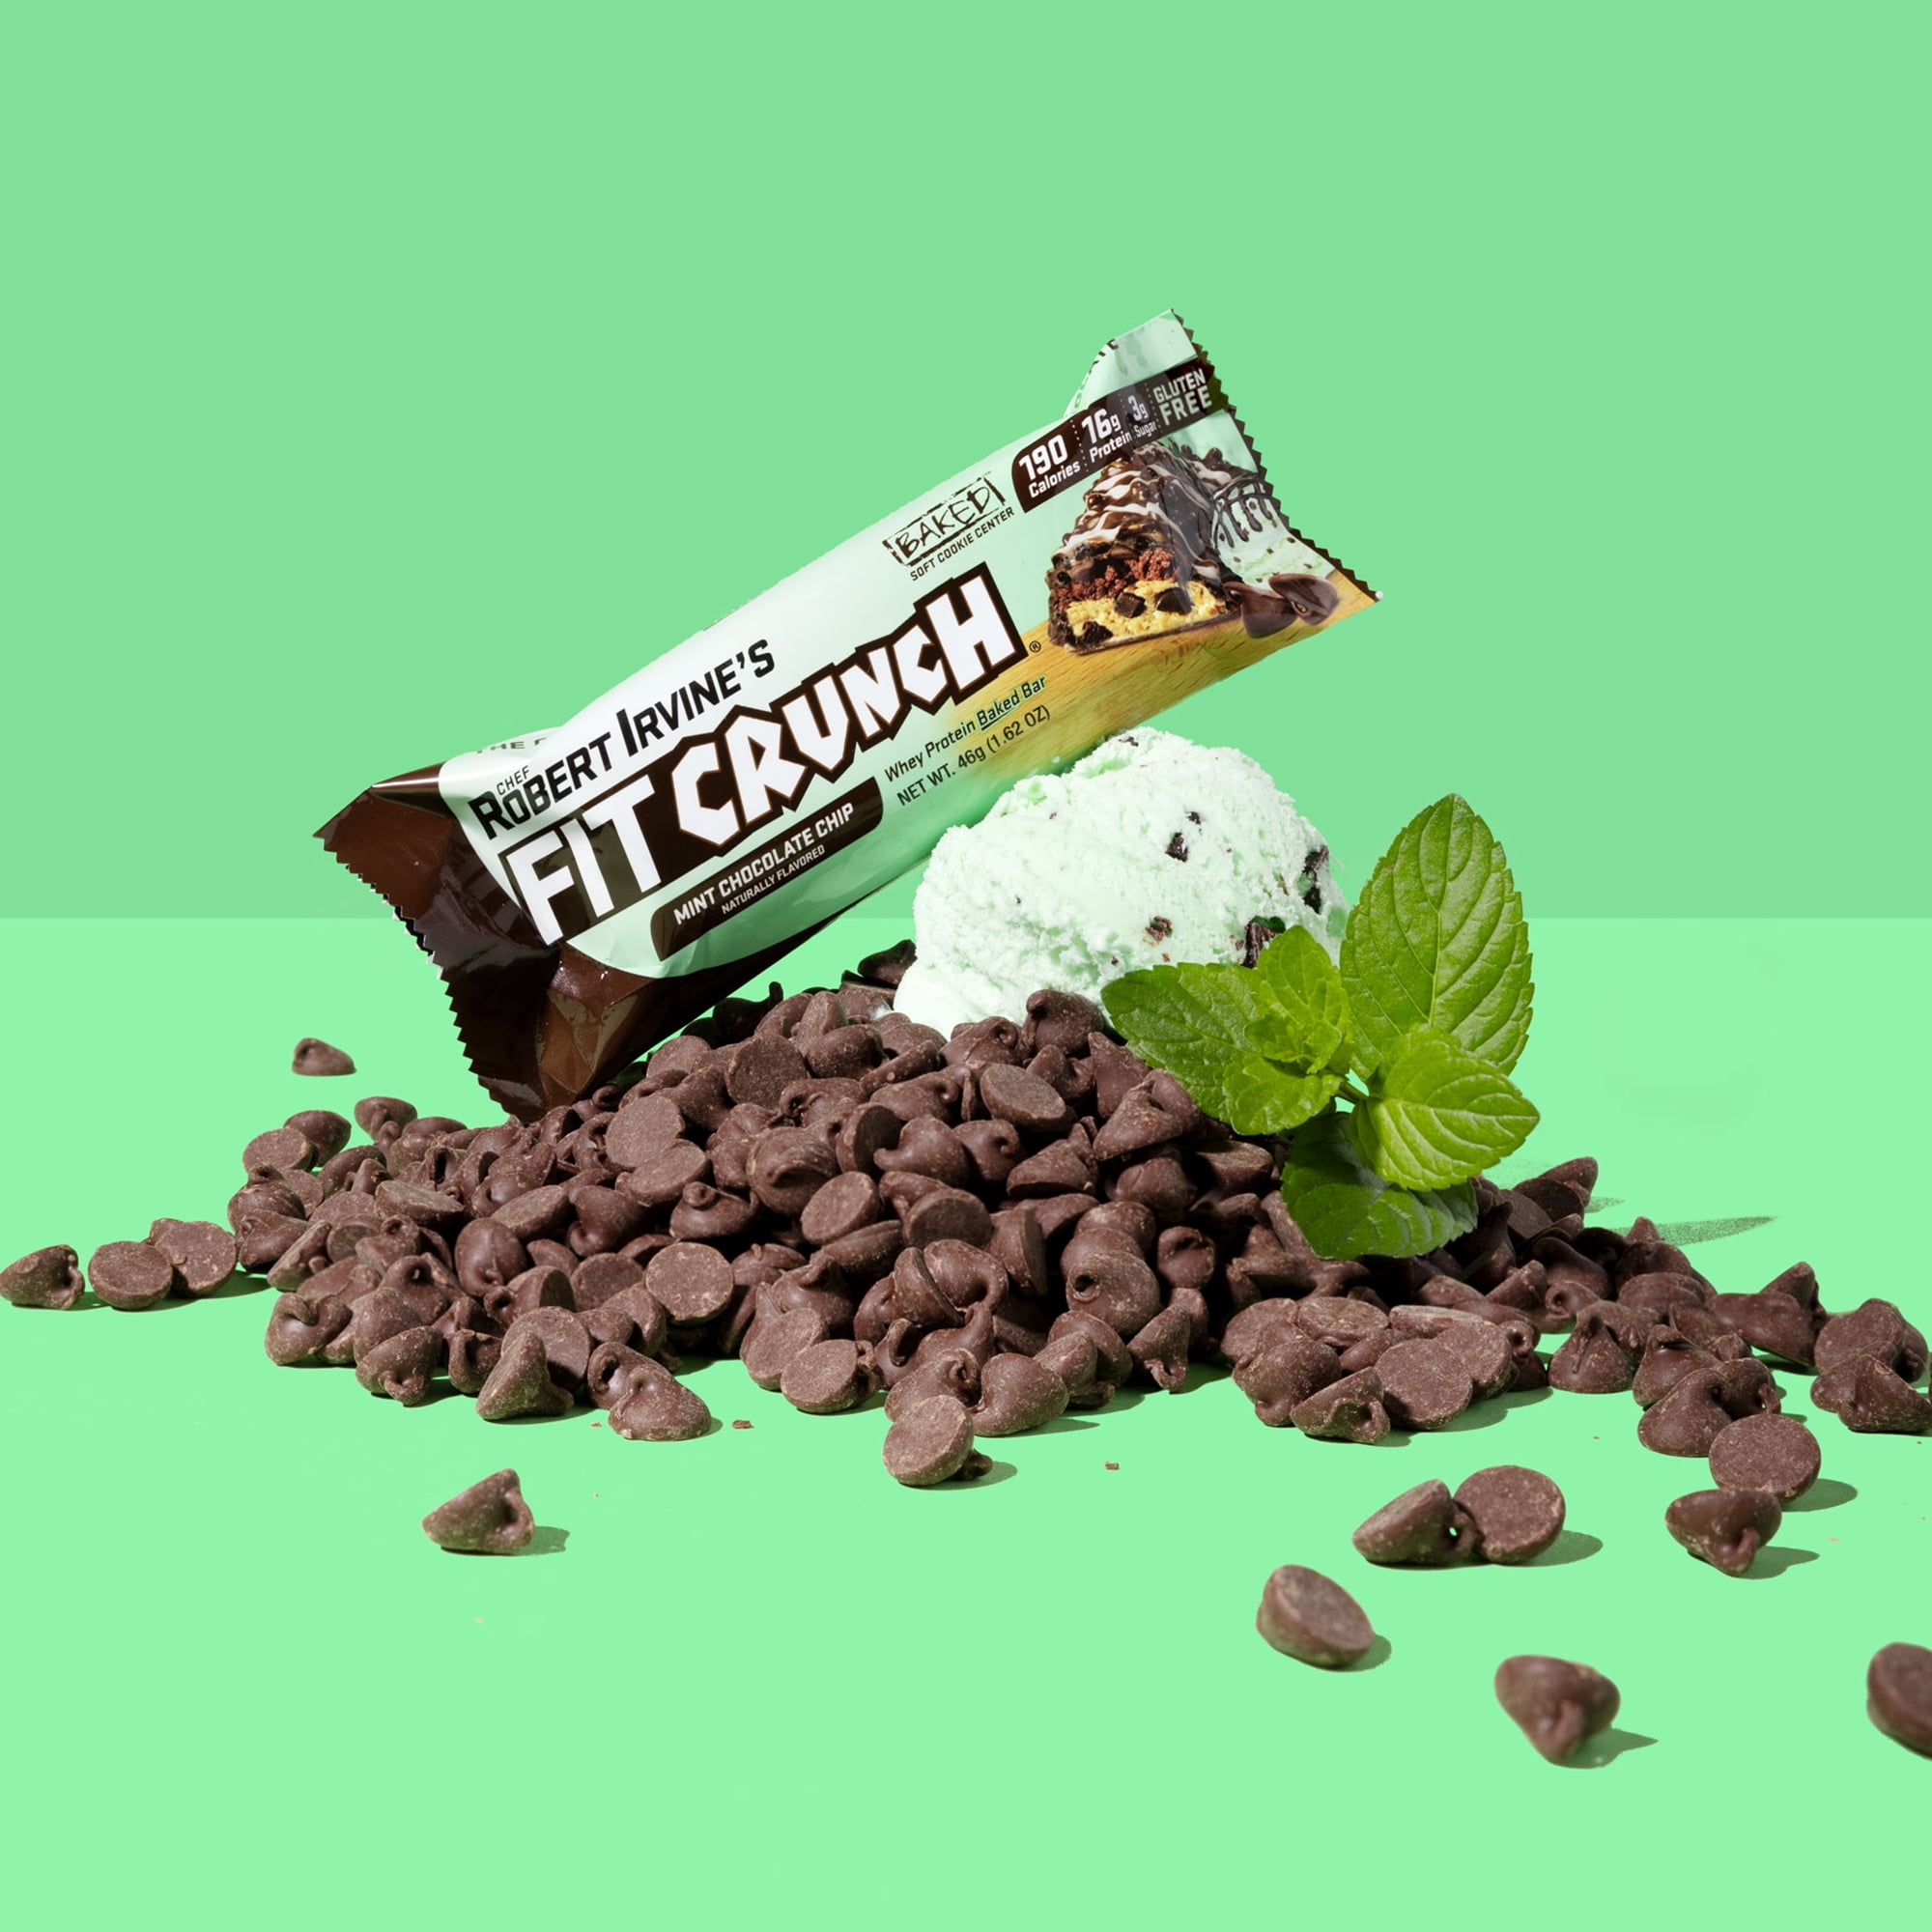 FITCRUNCH Mint Chocolate Chip, High Protein Baked Bar, 16g Protein